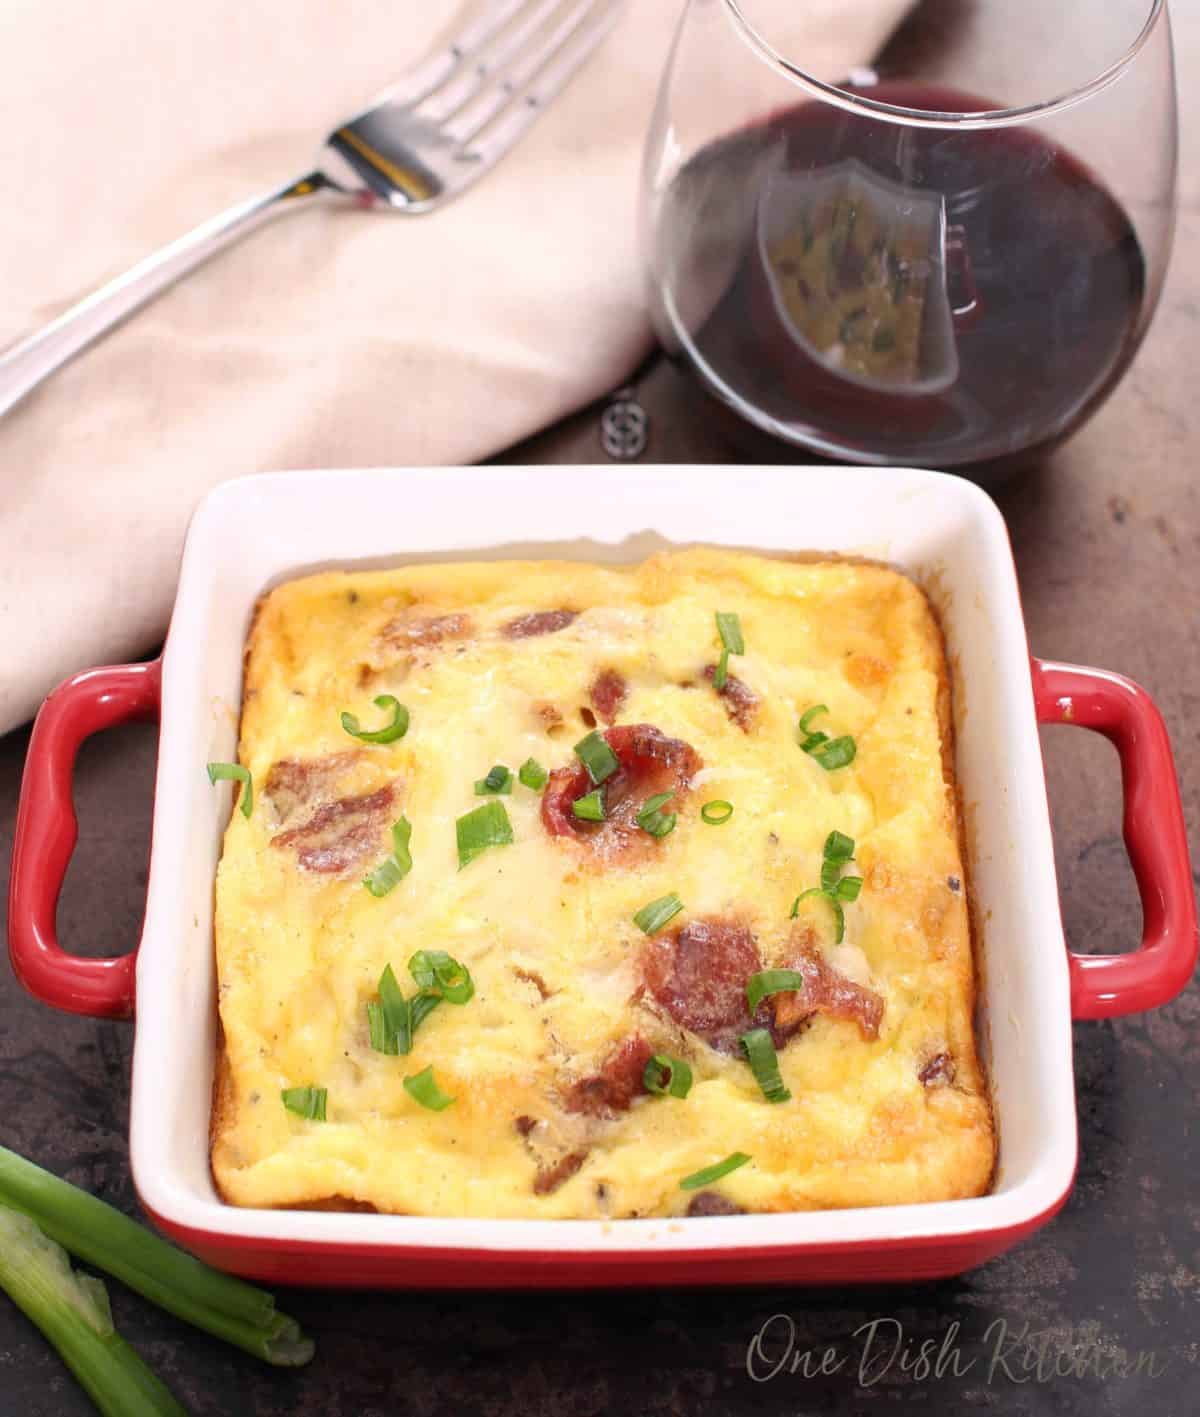 Overhead view of a crustless quiche with bacon and cheese in a small baking dish on a tray with a glass of red wine and a fork.